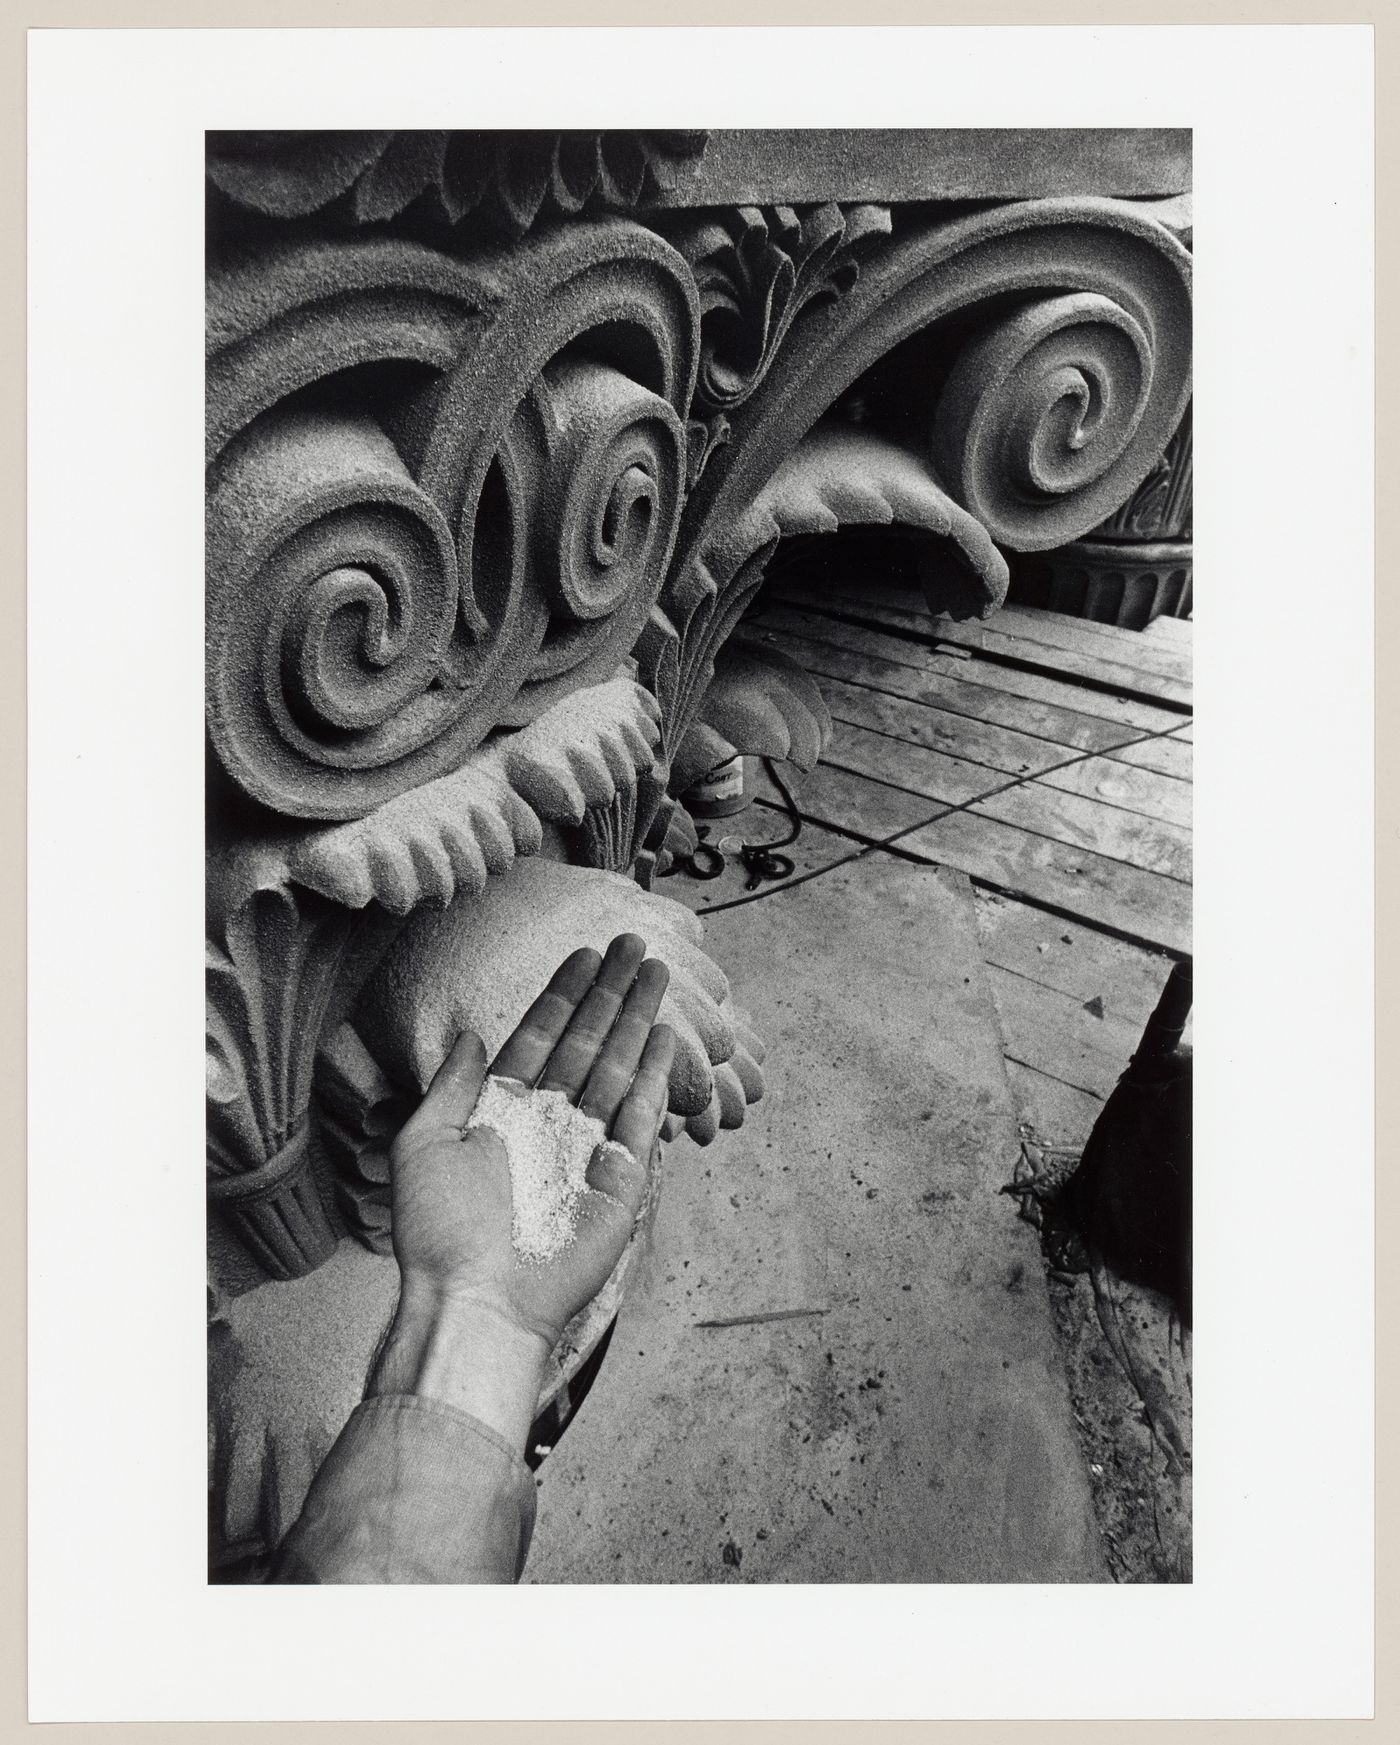 Close-up view of a worker dusting the surface of an aluminium capital with silica sand during the restoration of the Corinthian capitals of the principal façade of the Head Office of the Bank of Montréal, 119 rue Saint-Jacques, Montréal, Québec